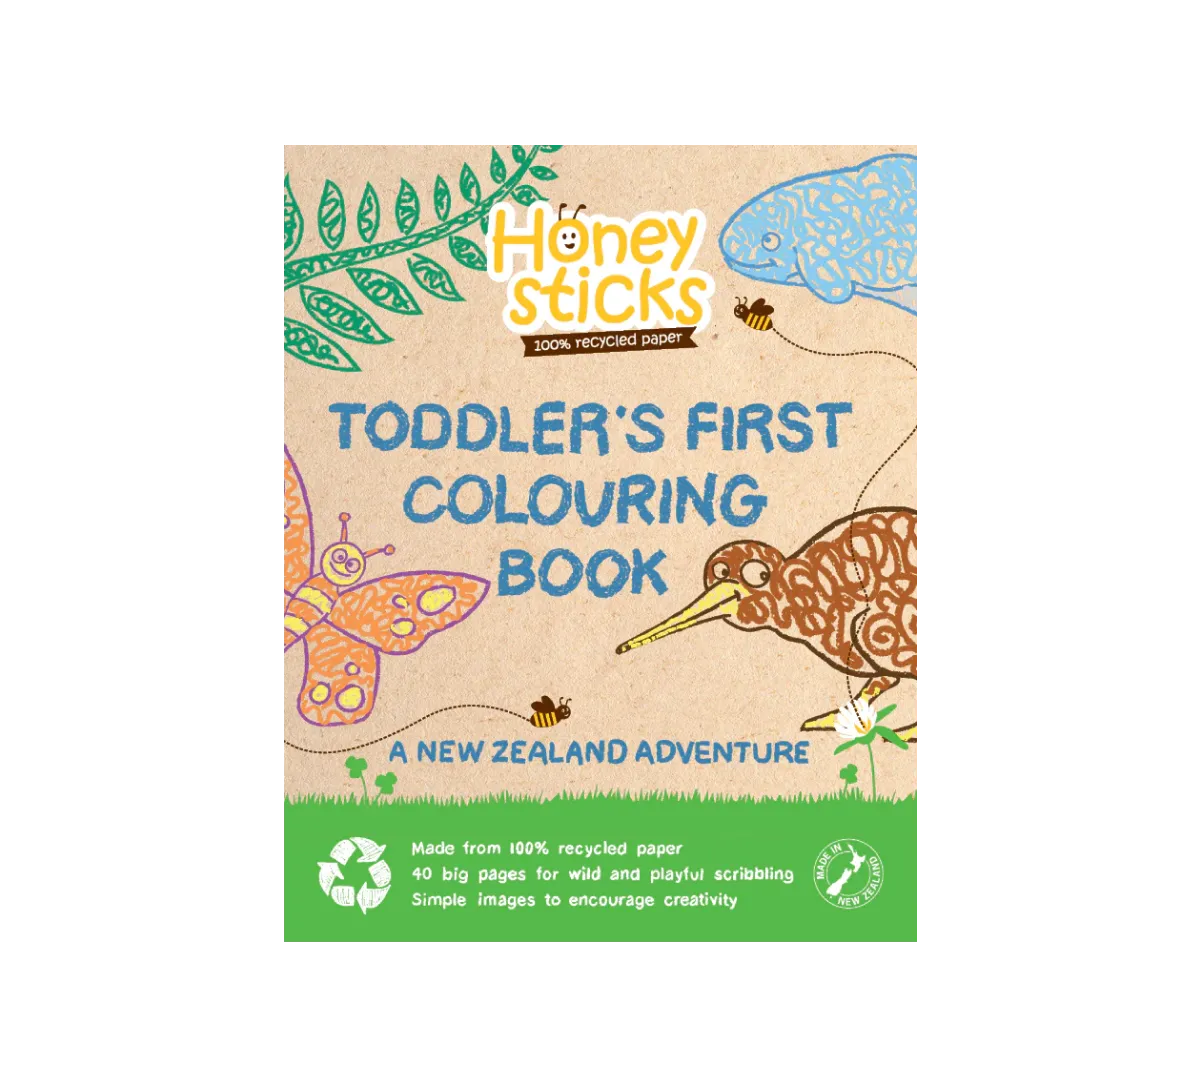 Toddlers First Colouring Book - A Kiwi Adventure